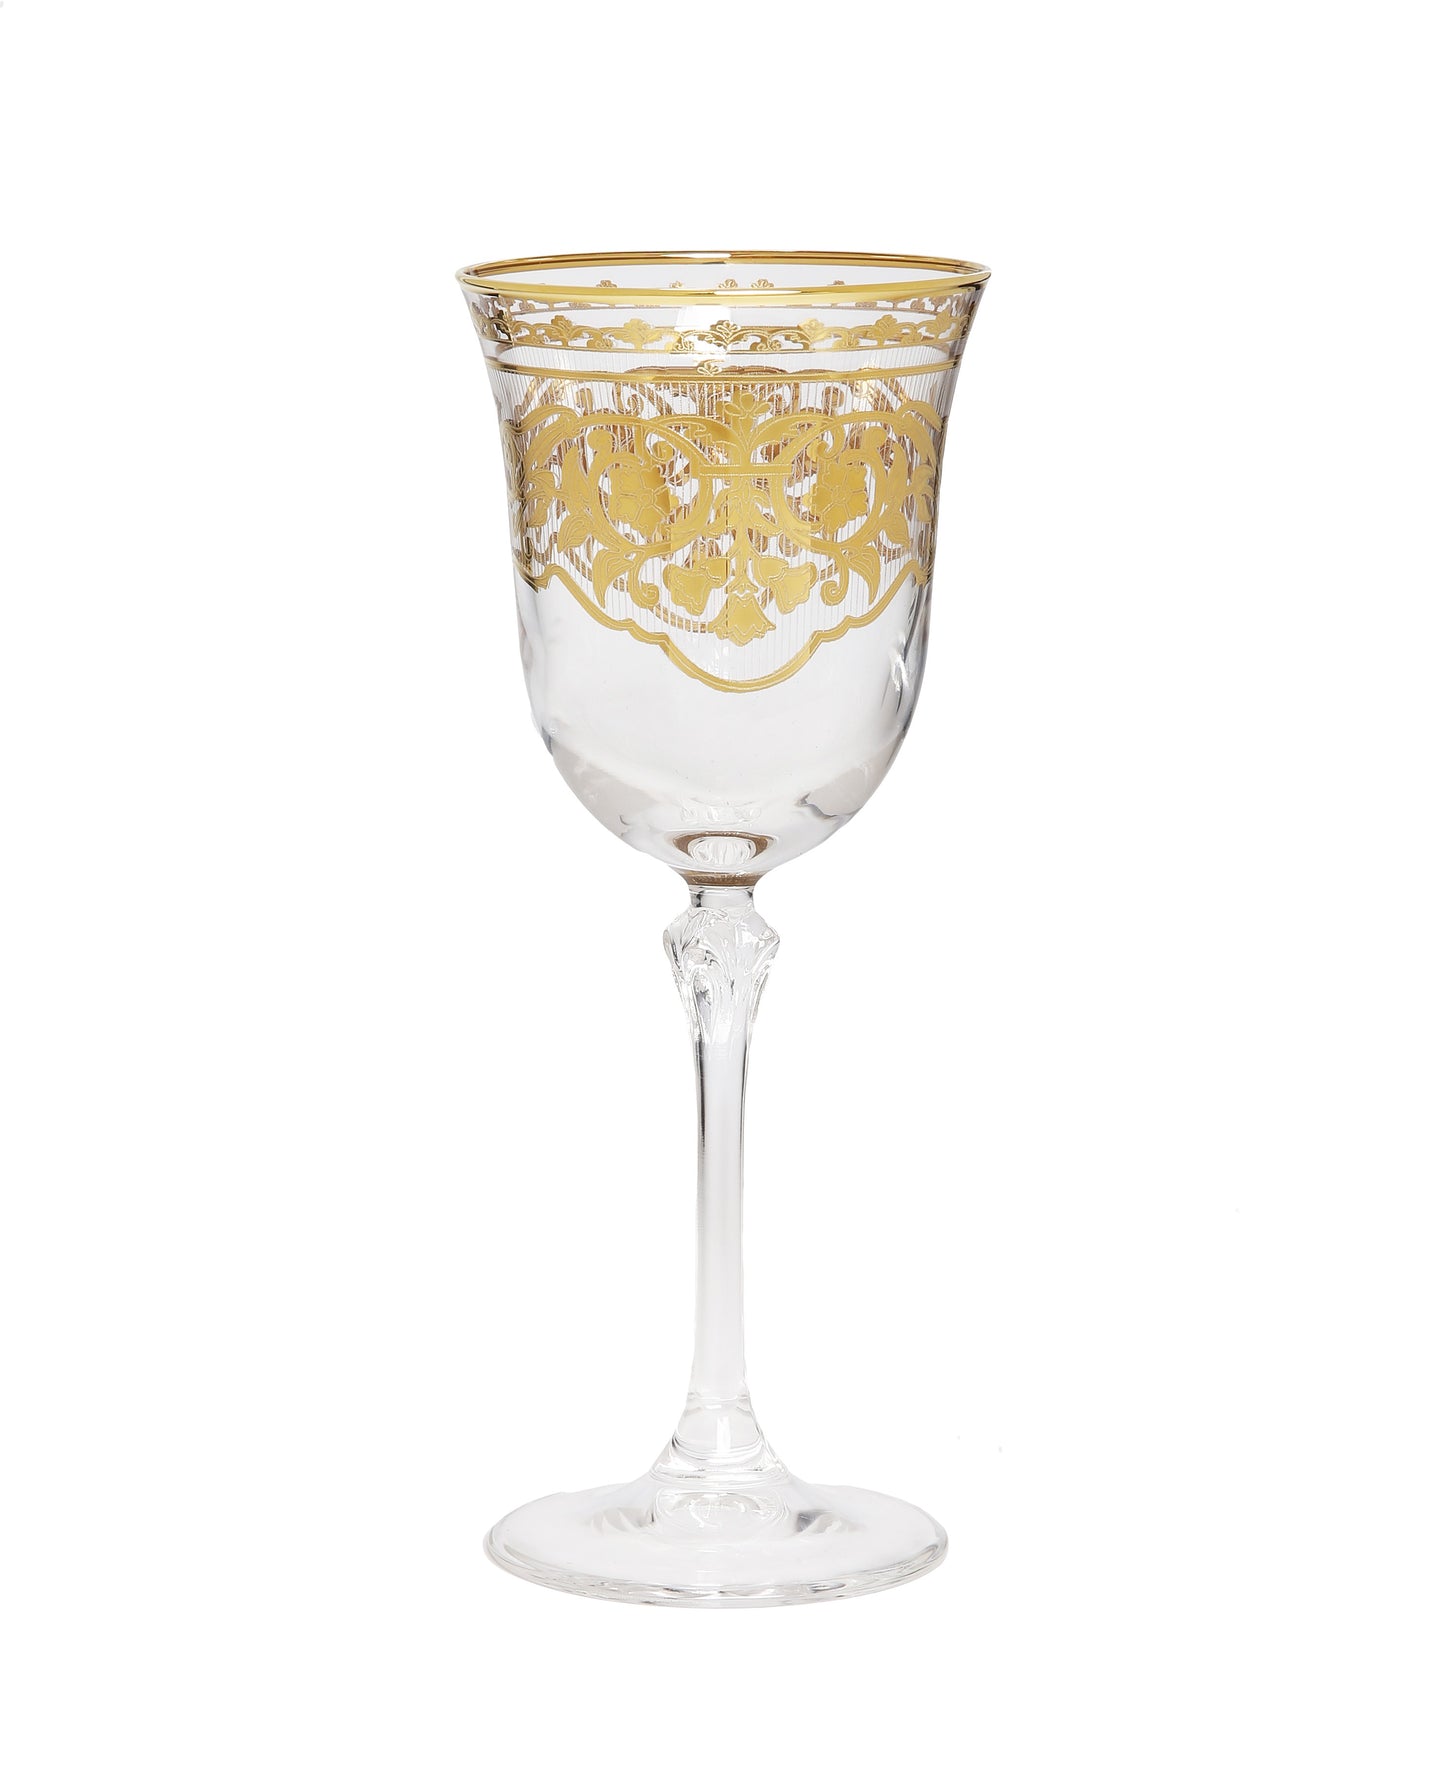 Set of 6 Wine Glasses with Gold Artwork